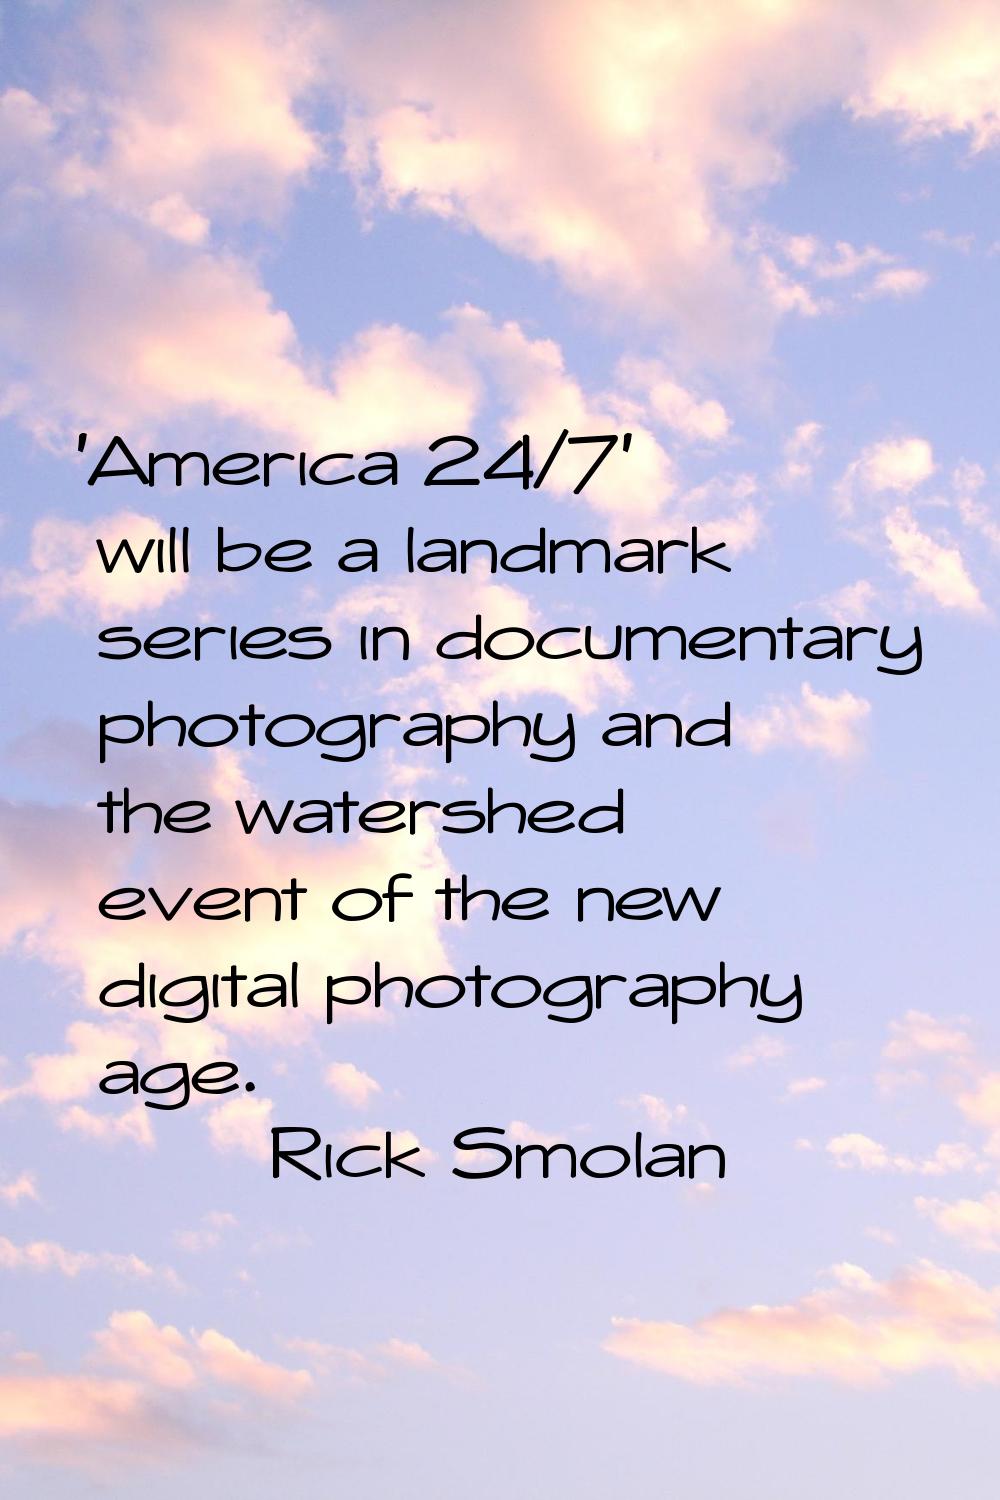 'America 24/7' will be a landmark series in documentary photography and the watershed event of the 